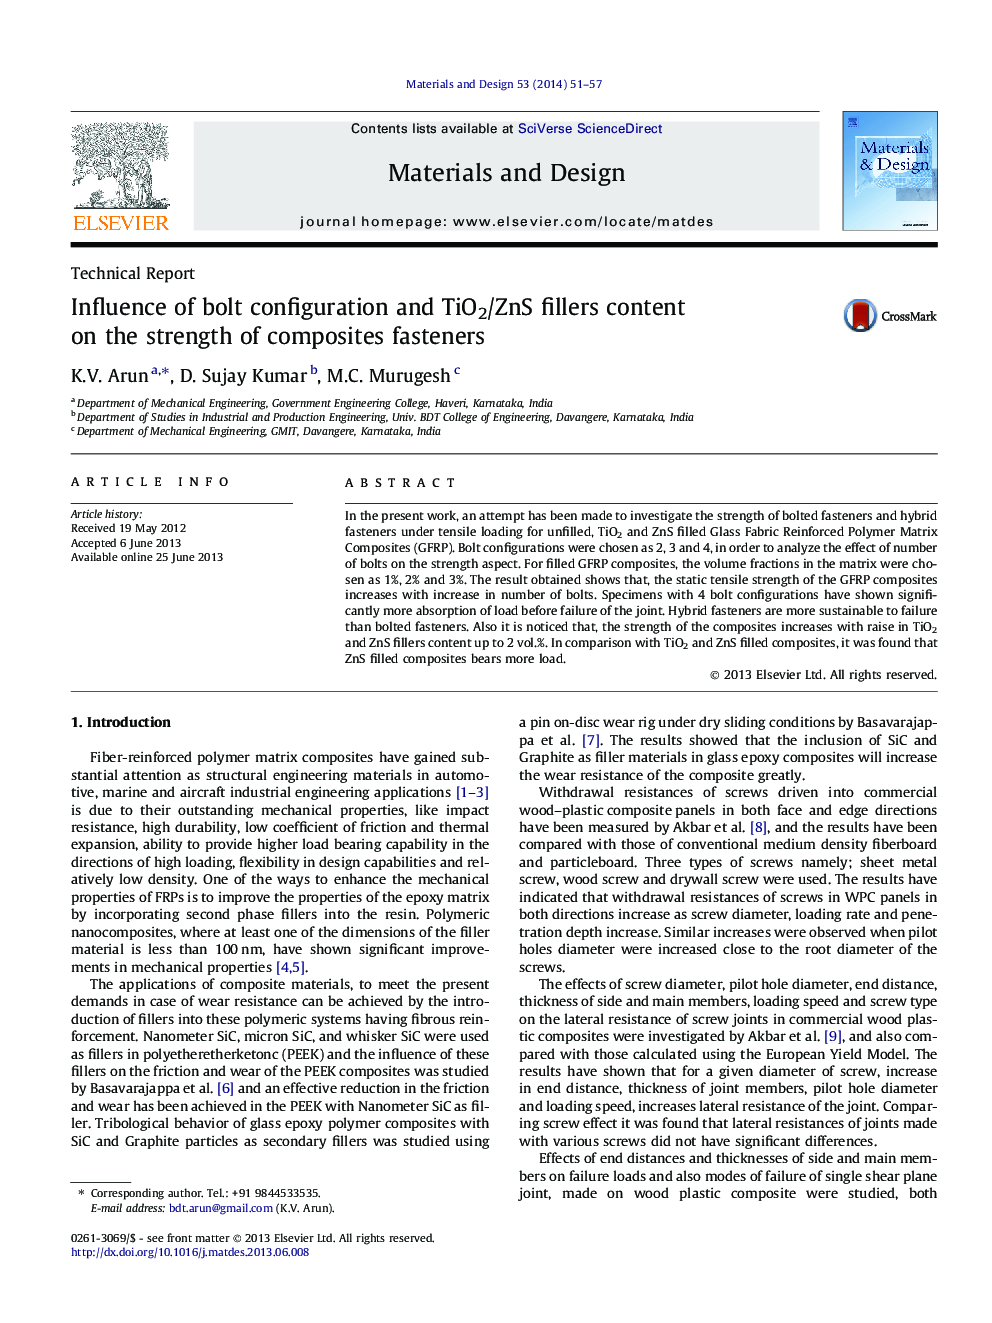 Influence of bolt configuration and TiO2/ZnS fillers content on the strength of composites fasteners